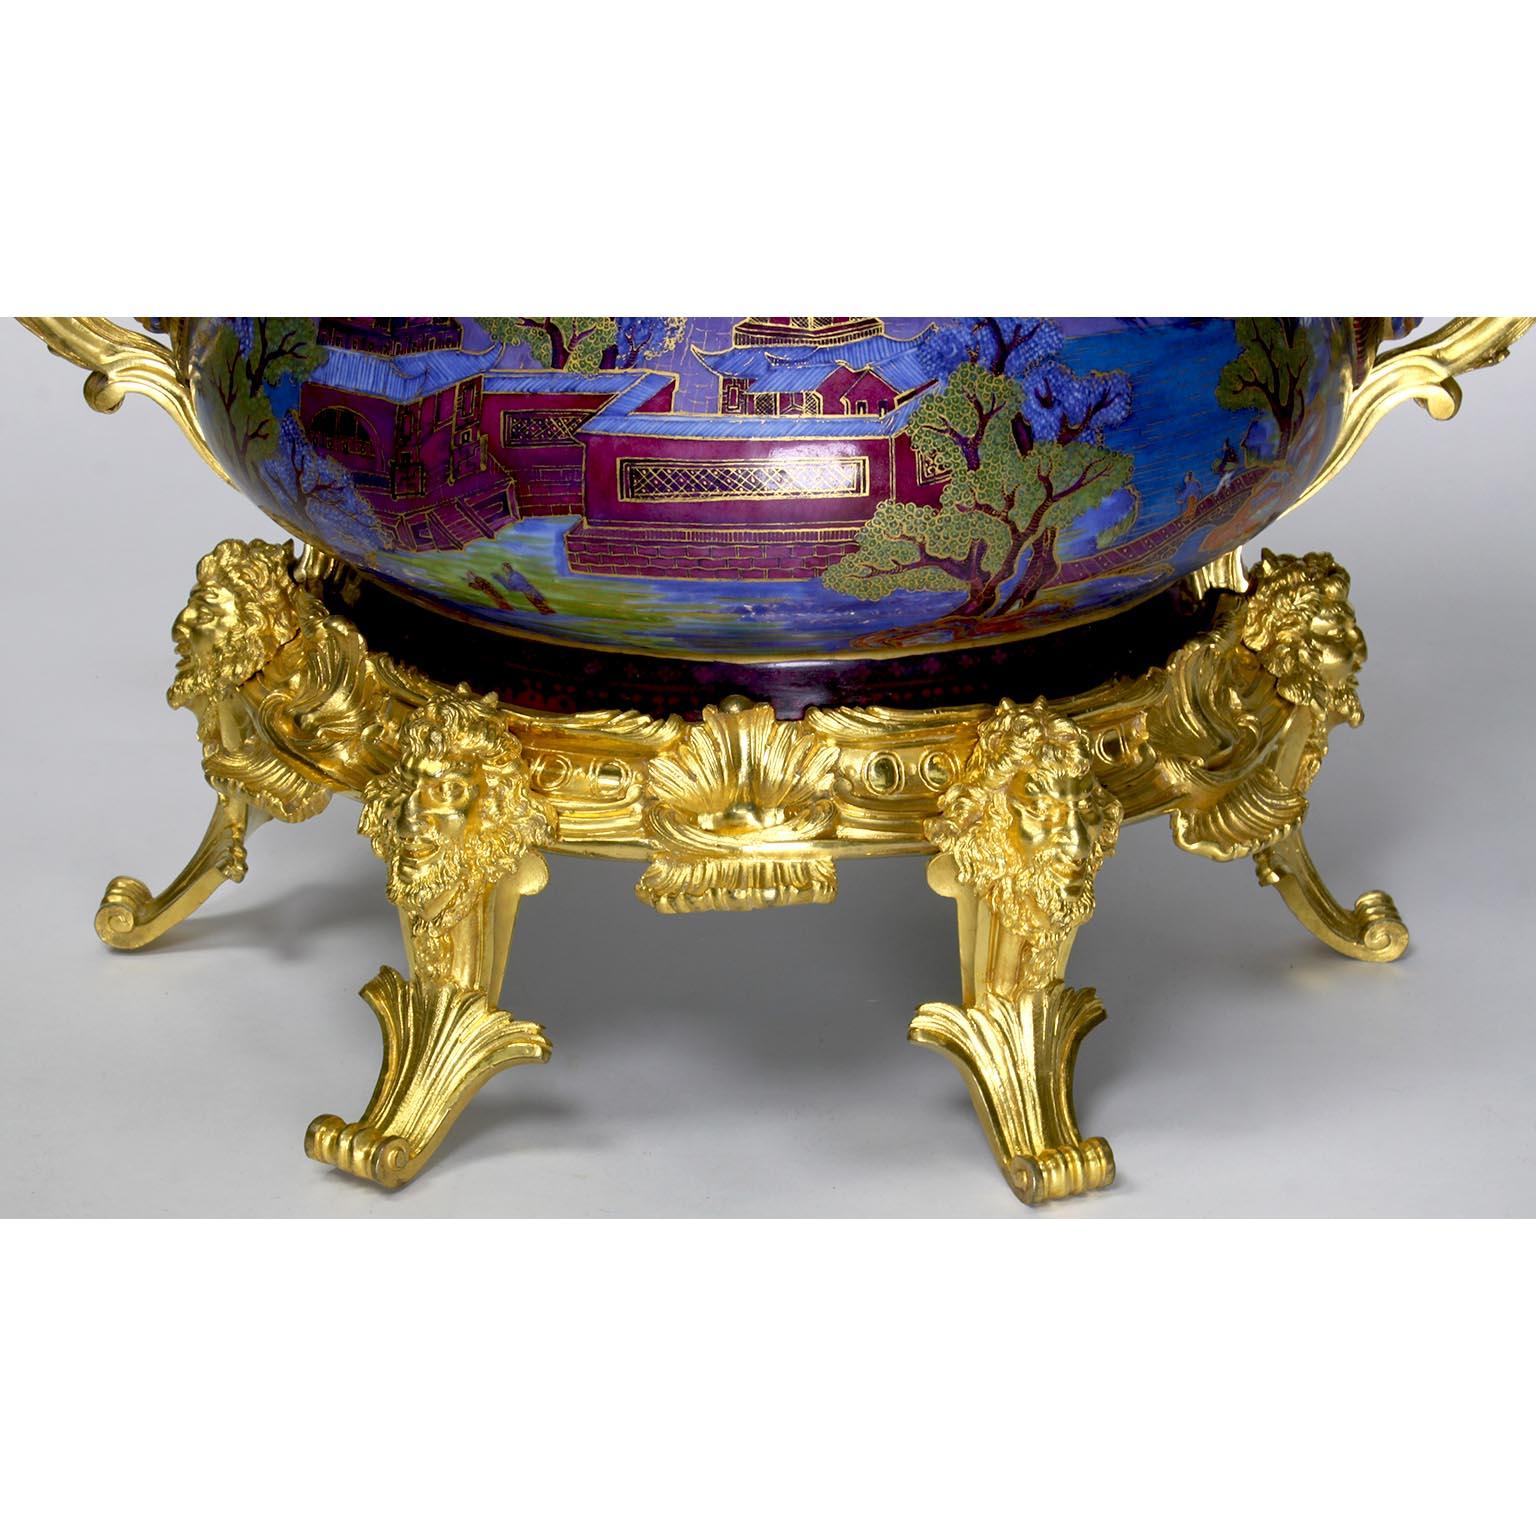 Chinese Export Famille Verte Porcelain & French Ormolu Chinoiserie Centerpiece In Good Condition For Sale In Los Angeles, CA